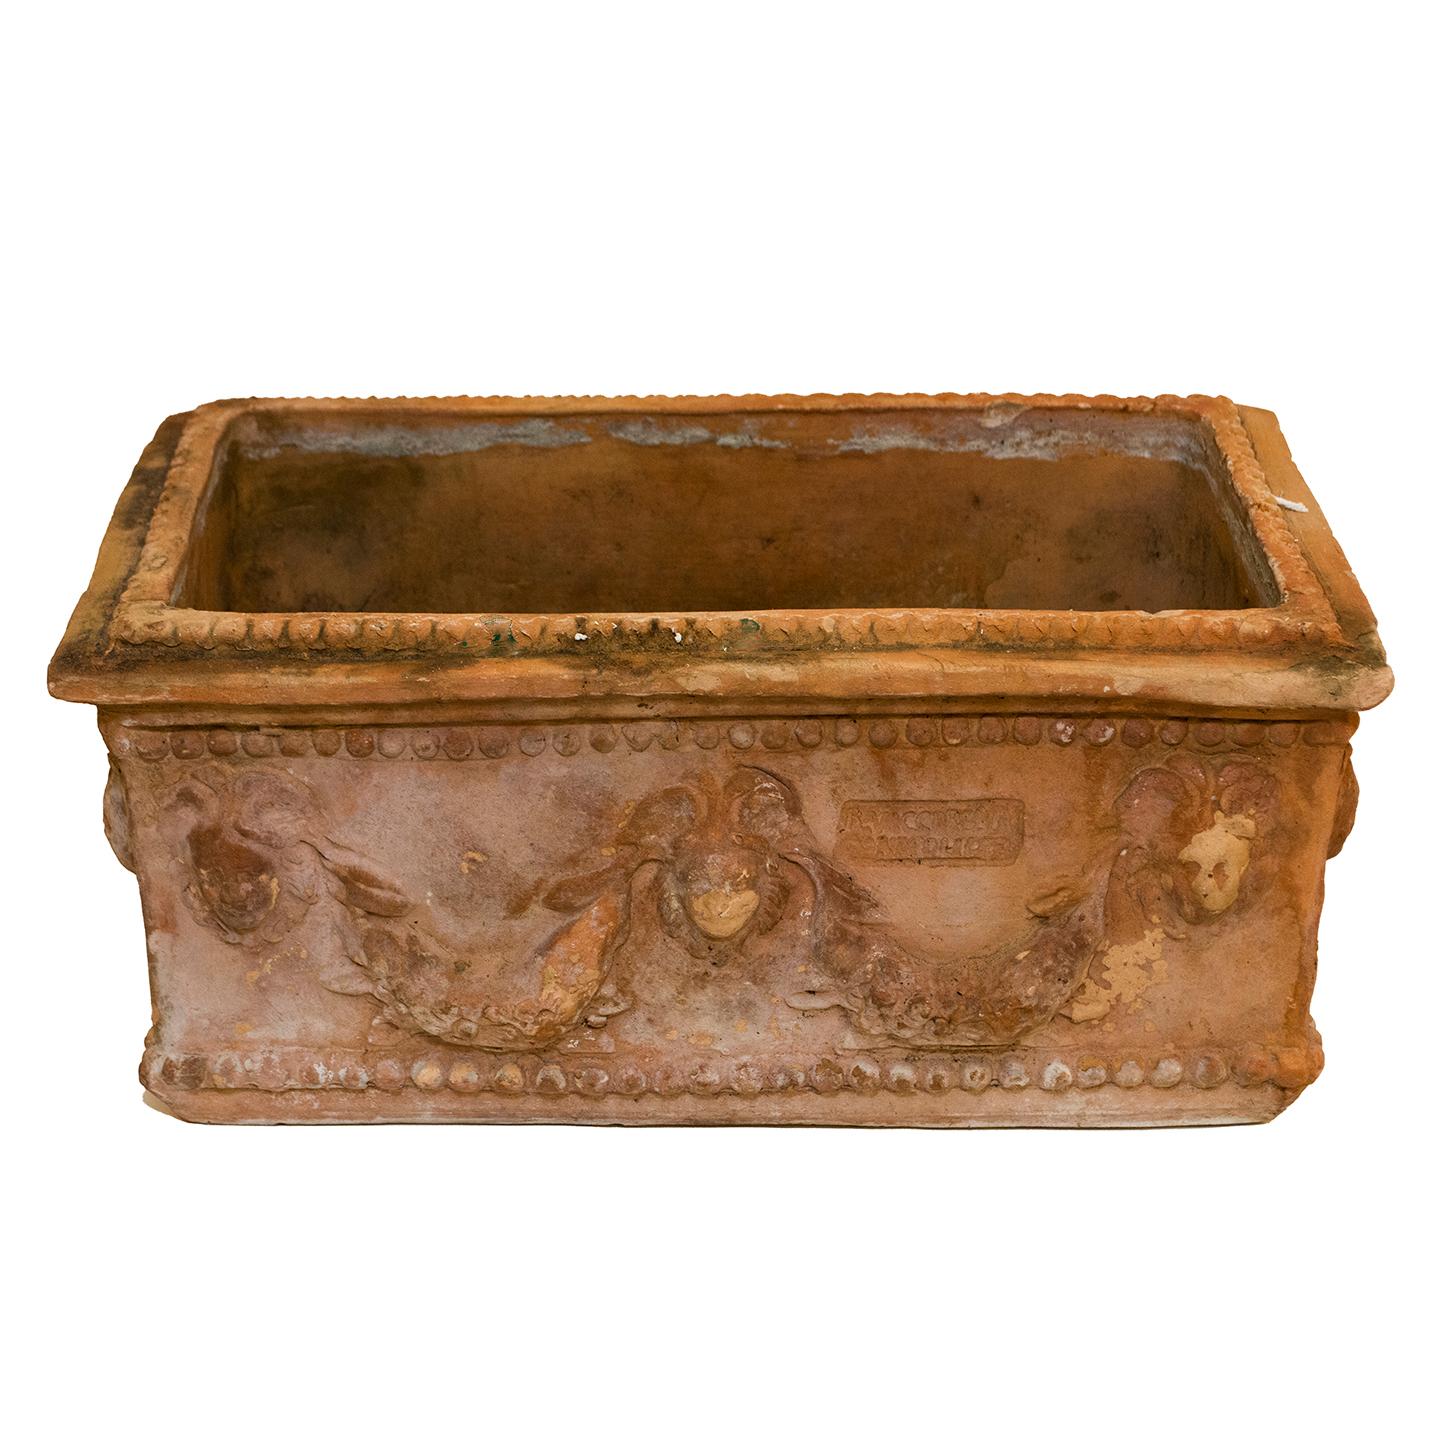 An Antique Neapolitan terra cotta planter adorned with festoons and lion heads. This attractive planter would make a stunning addition to your garden, window box, out on your deck, or in a sunny spot inside your home. They are stamped R Vaccarella,